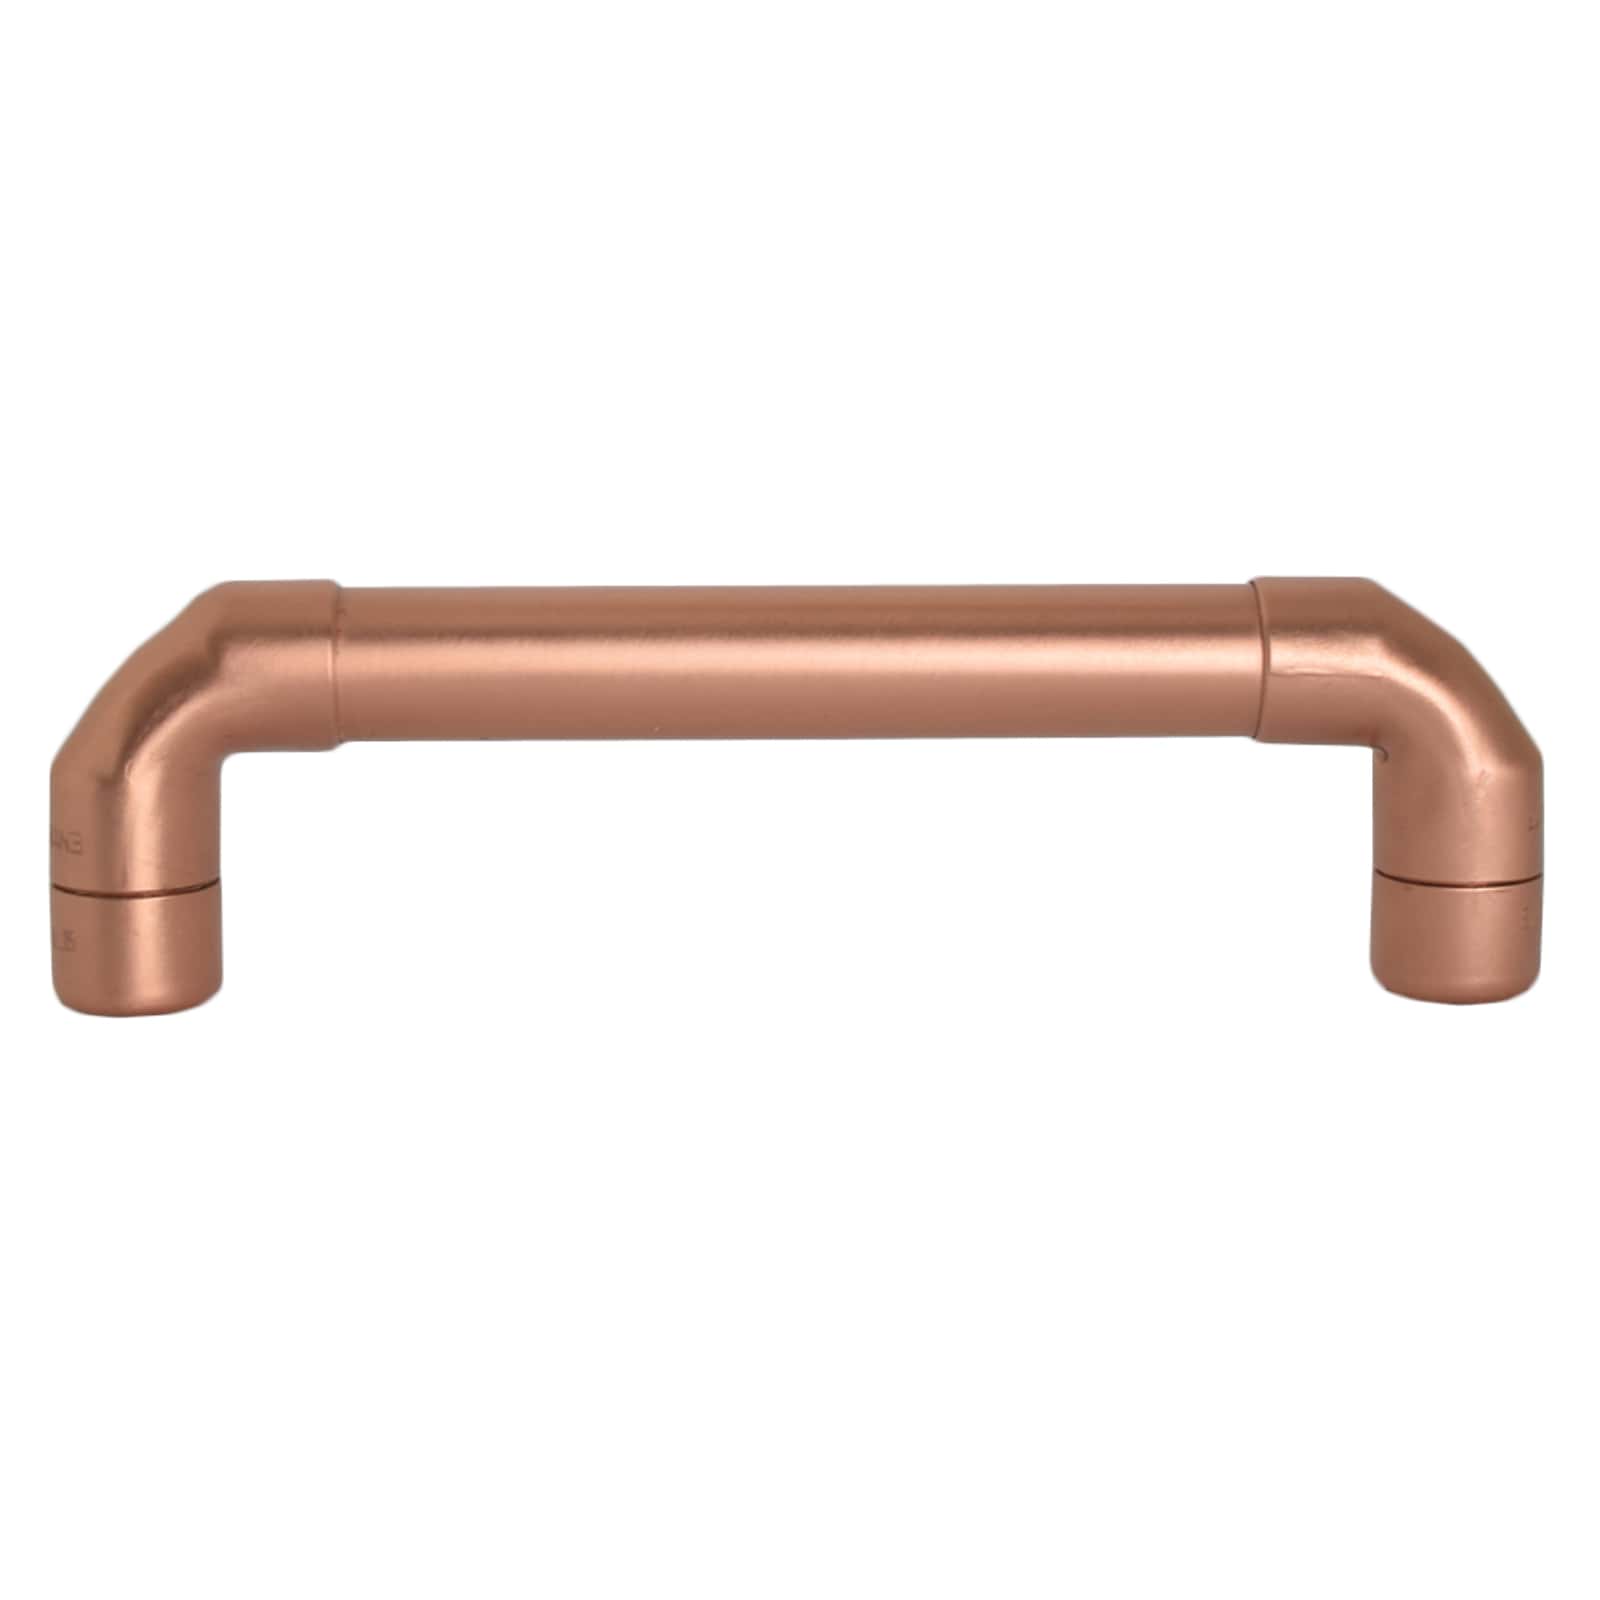 Copper Handle on white background